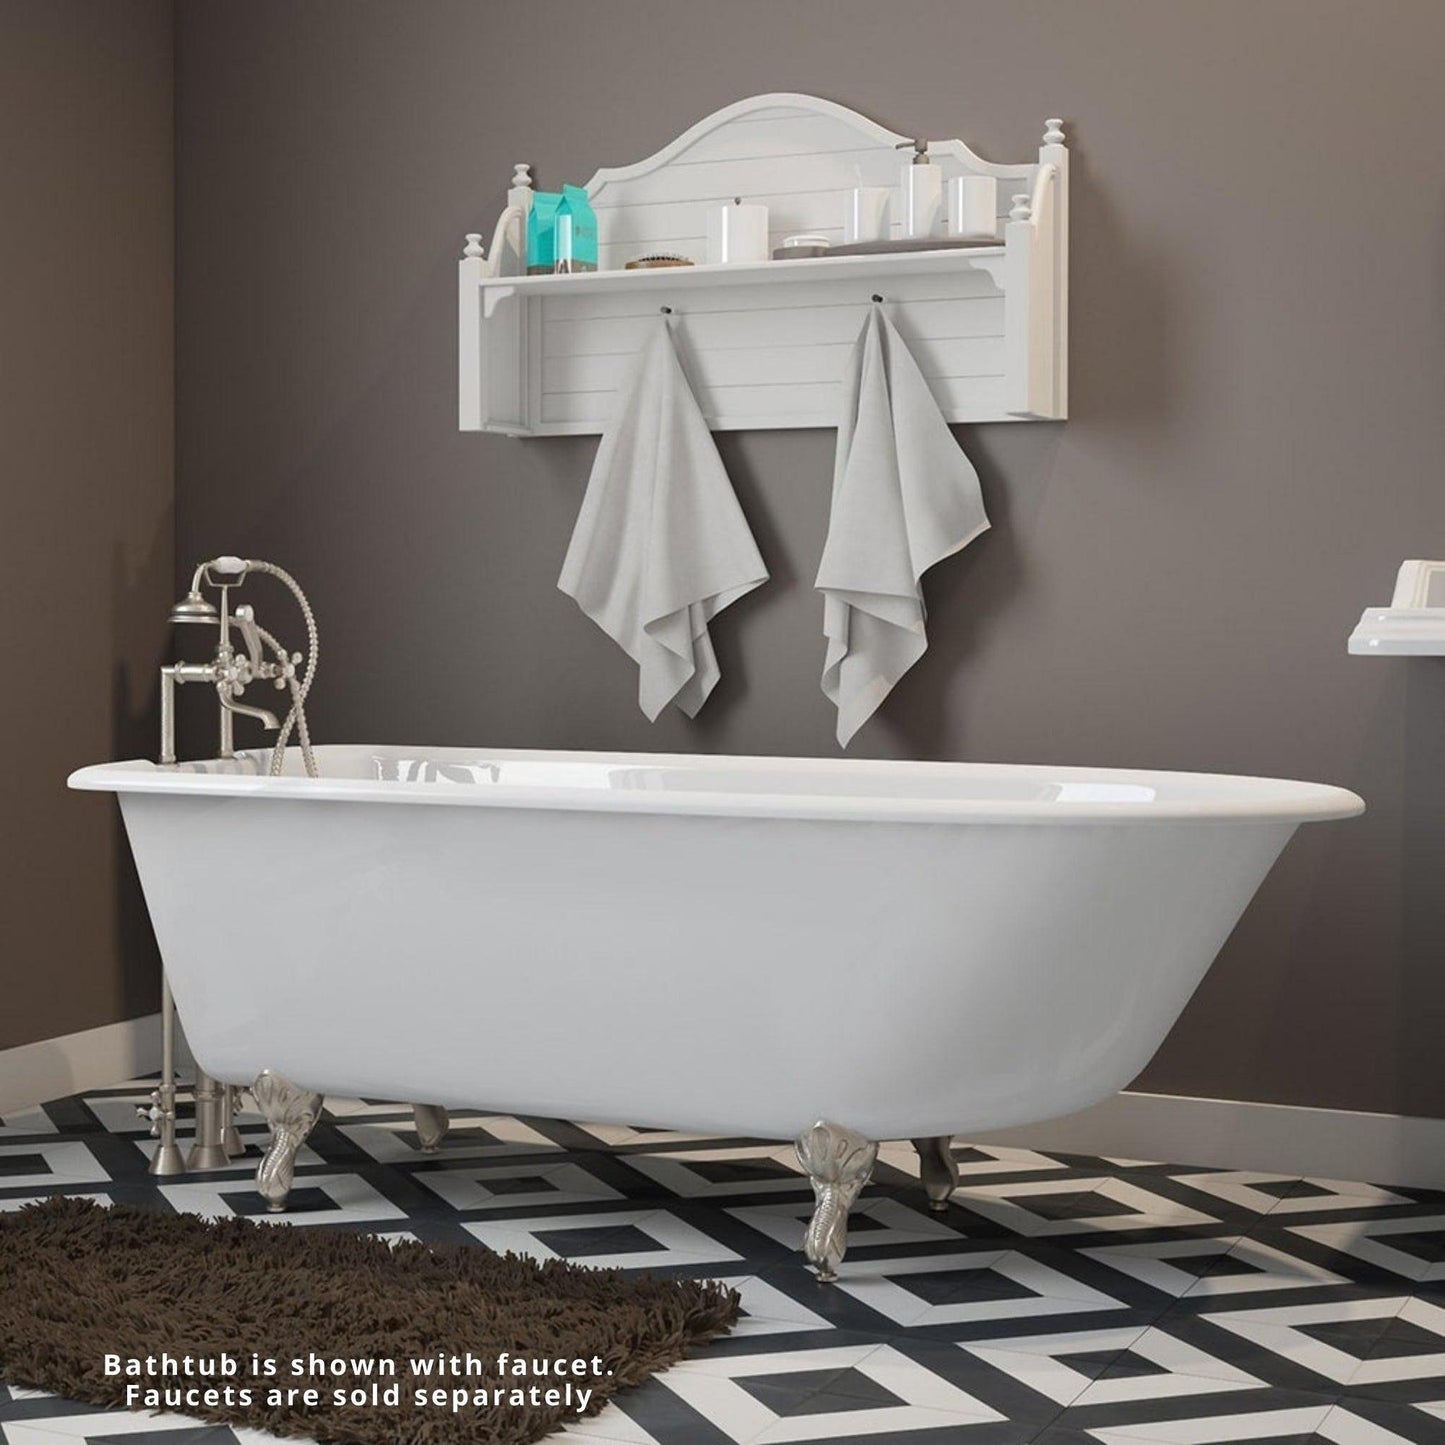 Cambridge Plumbing 60" White Cast Iron Rolled Rim Clawfoot Bathtub With Deck Holes With Brushed Nickel Feet